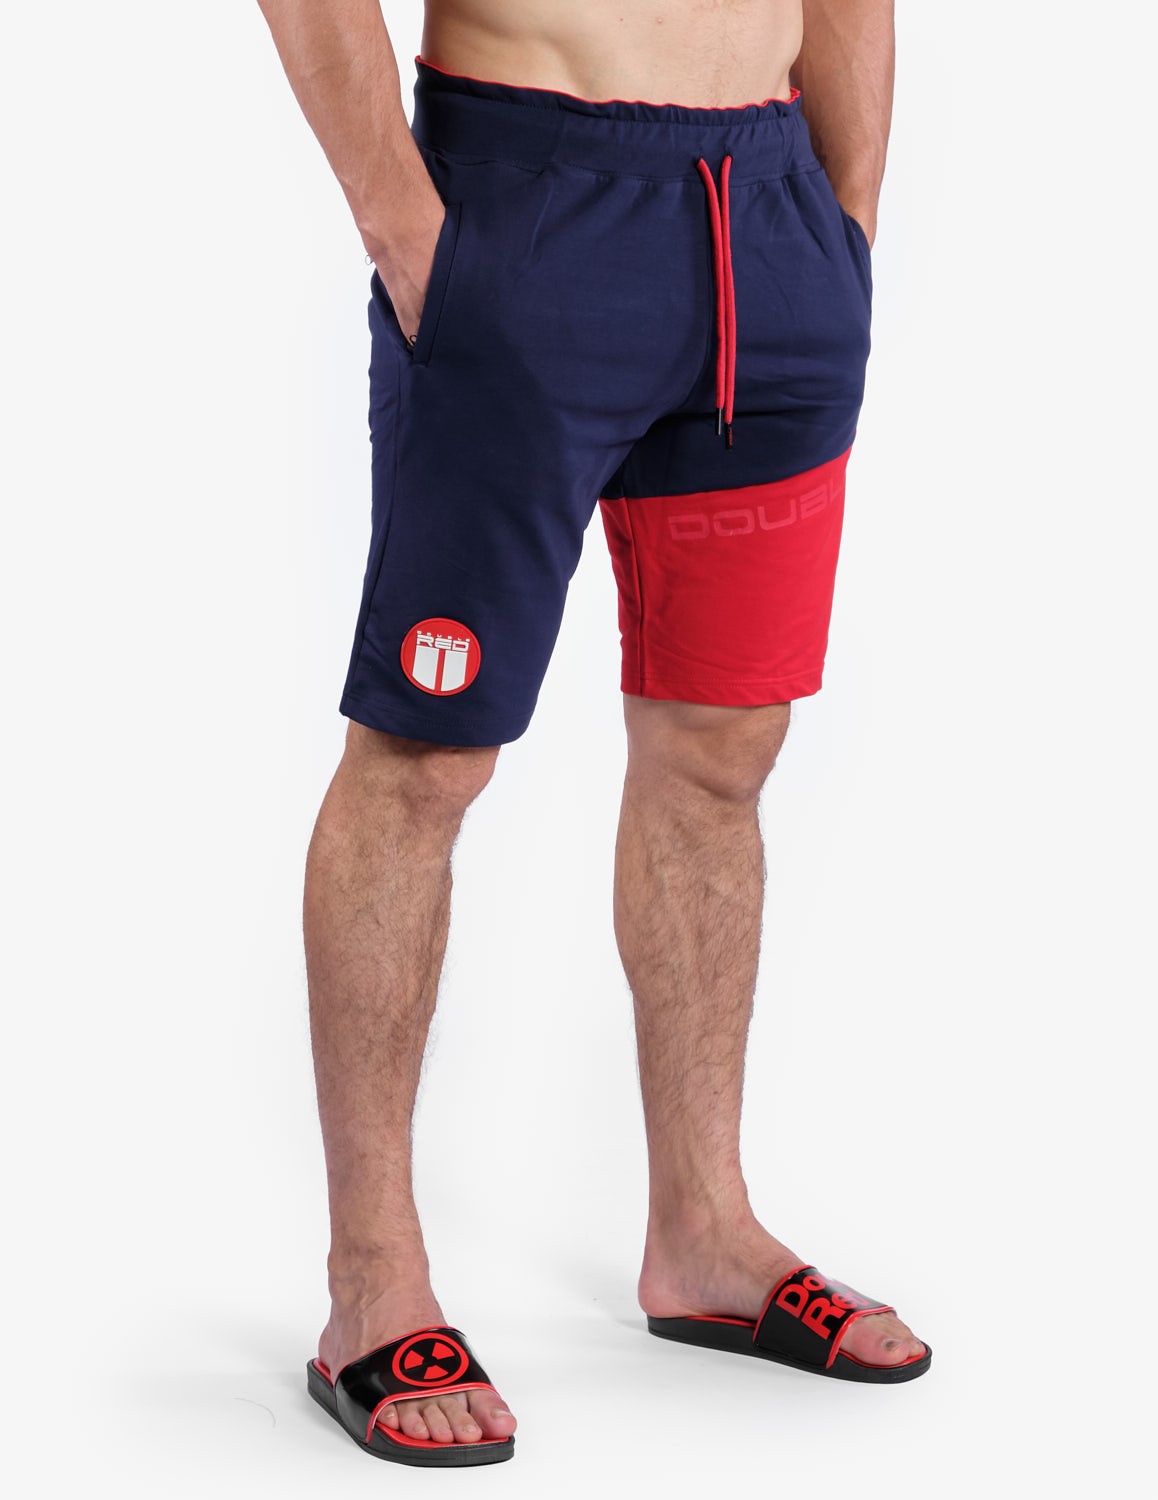 DUO RED Shorts Red/Navy